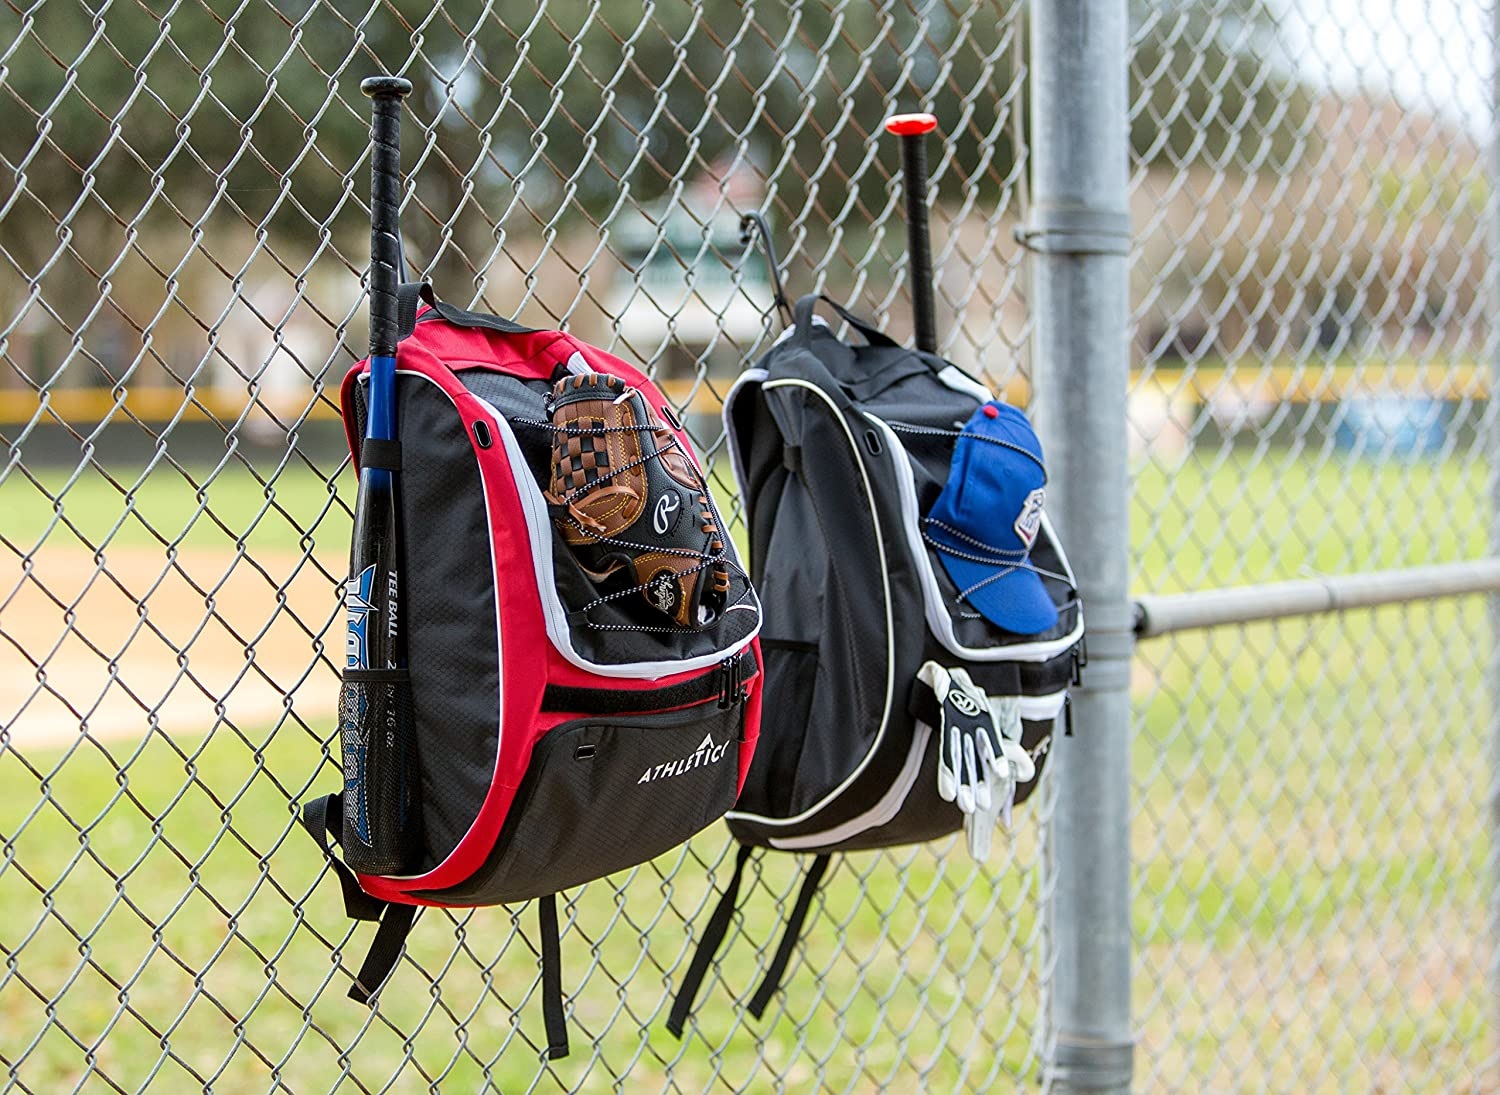 Find Out Your Best Deals with the Custom Baseball Bags